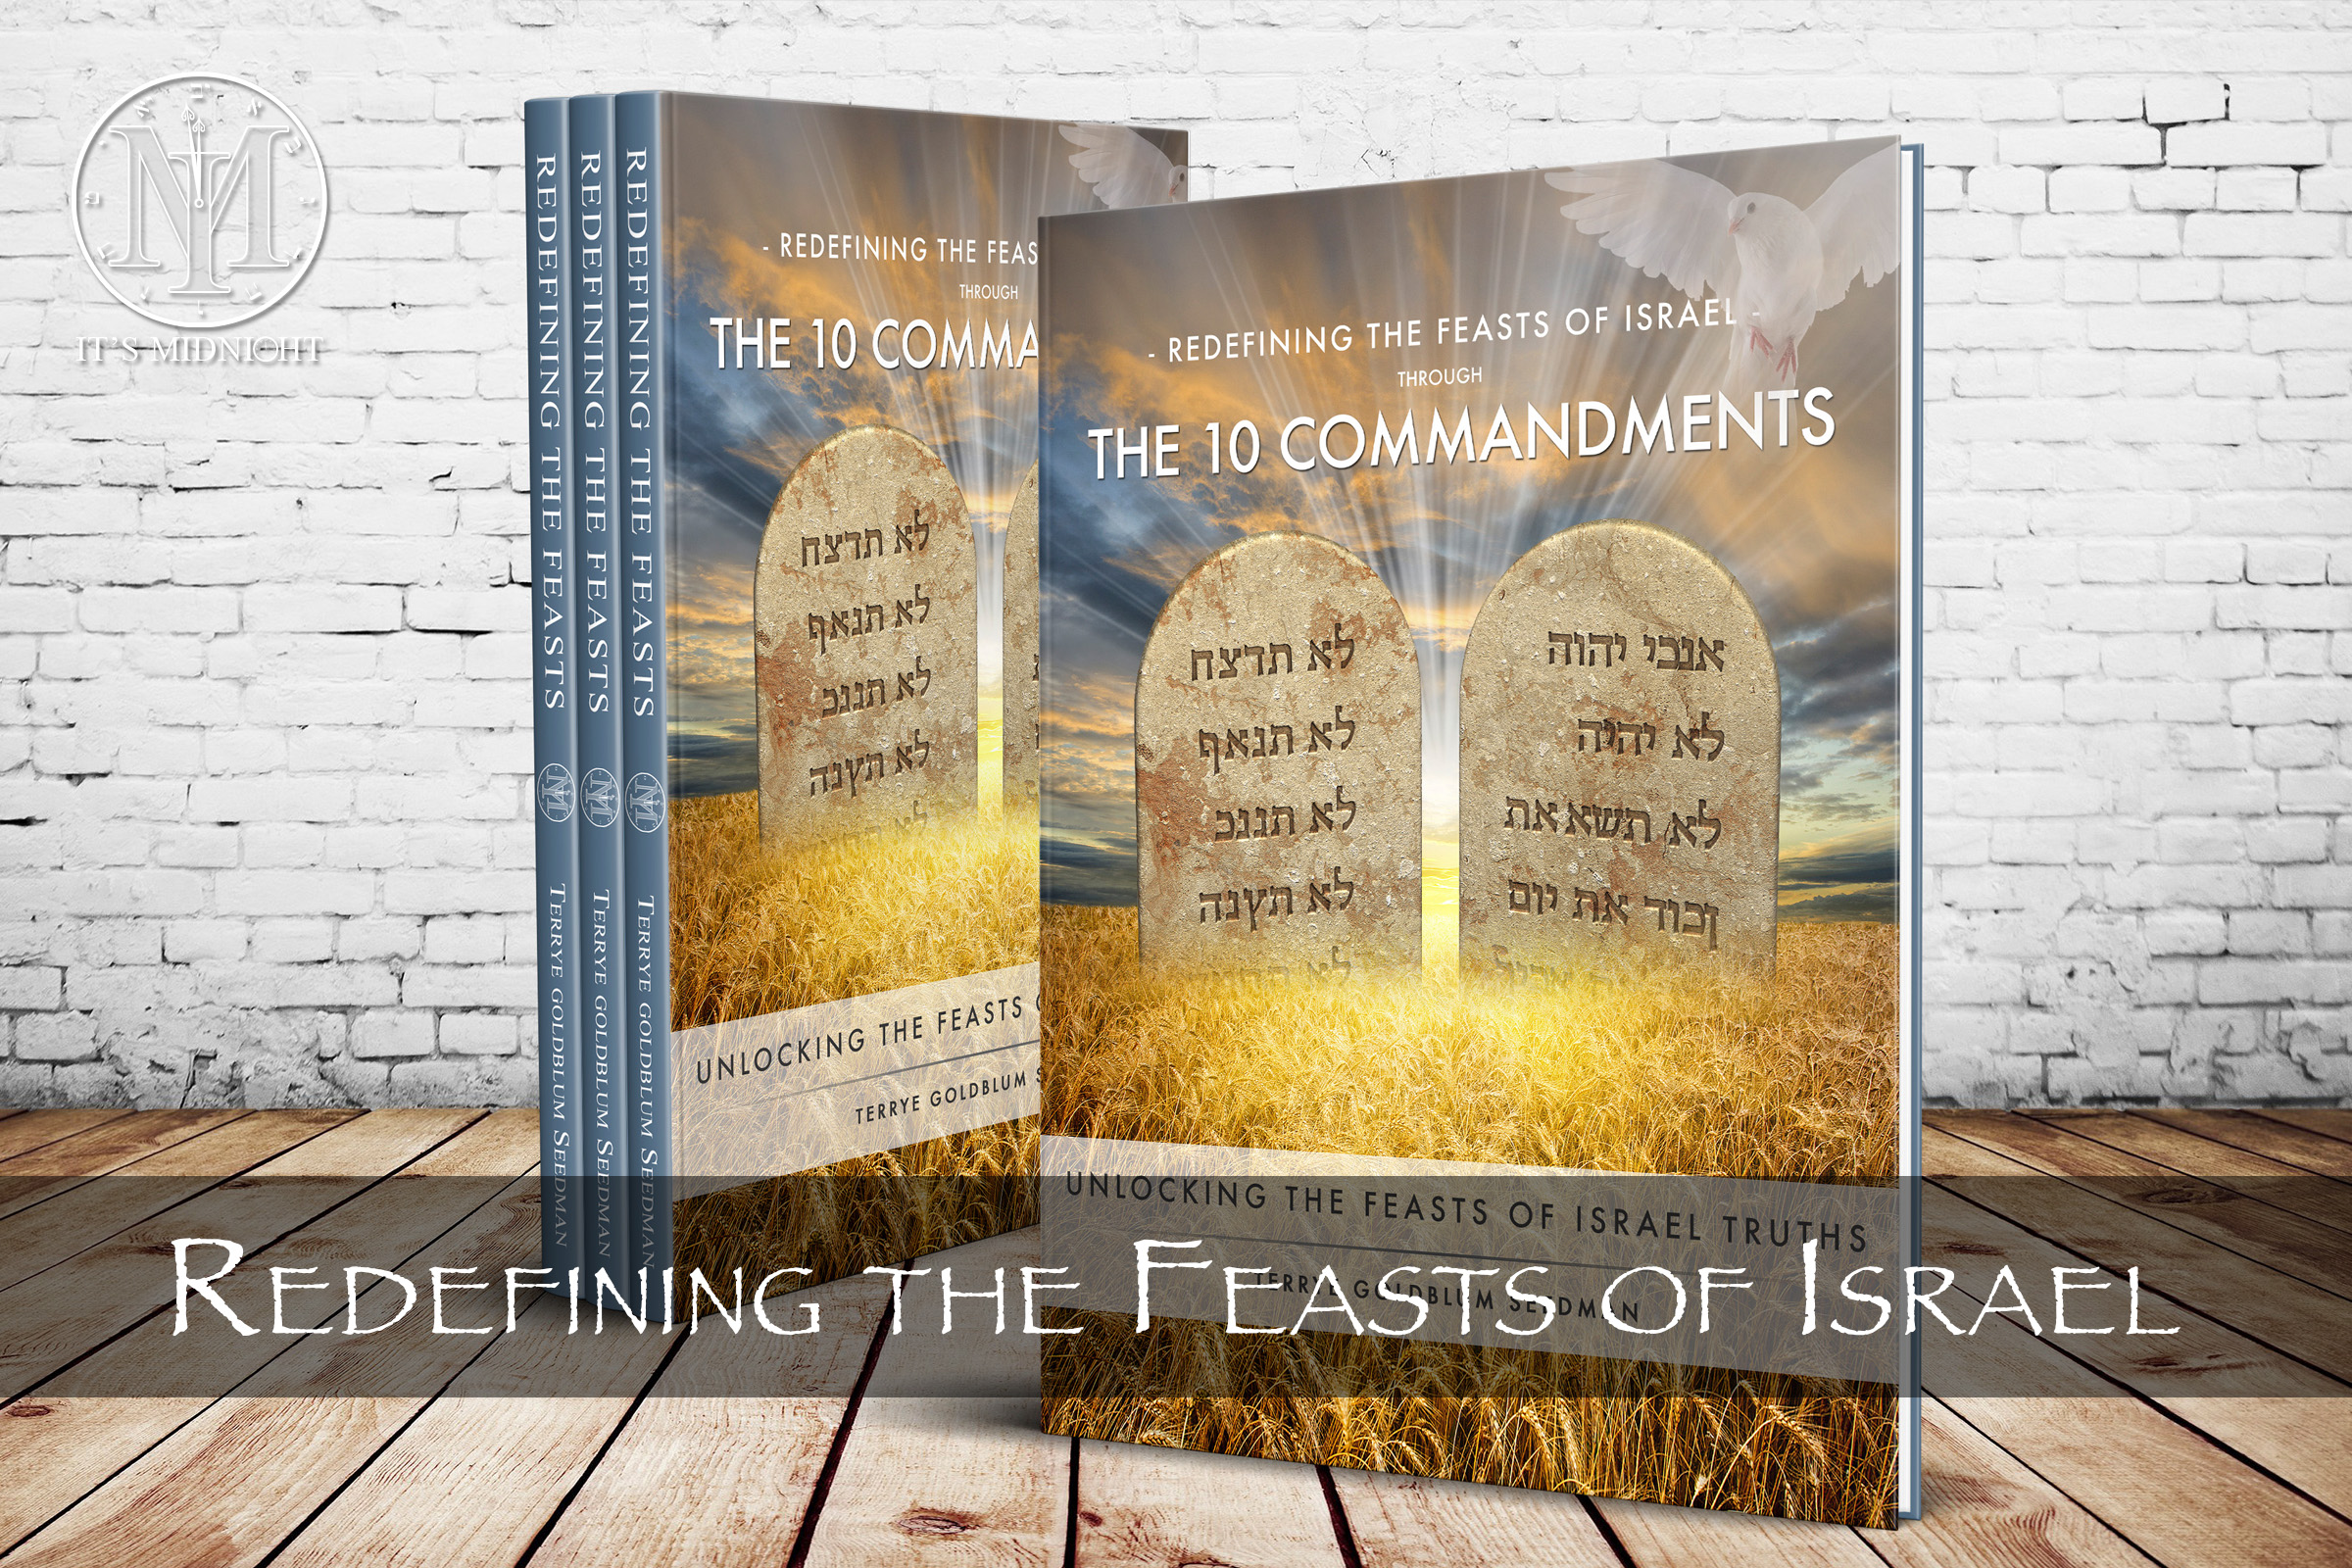 Redefining the Feasts of Israel